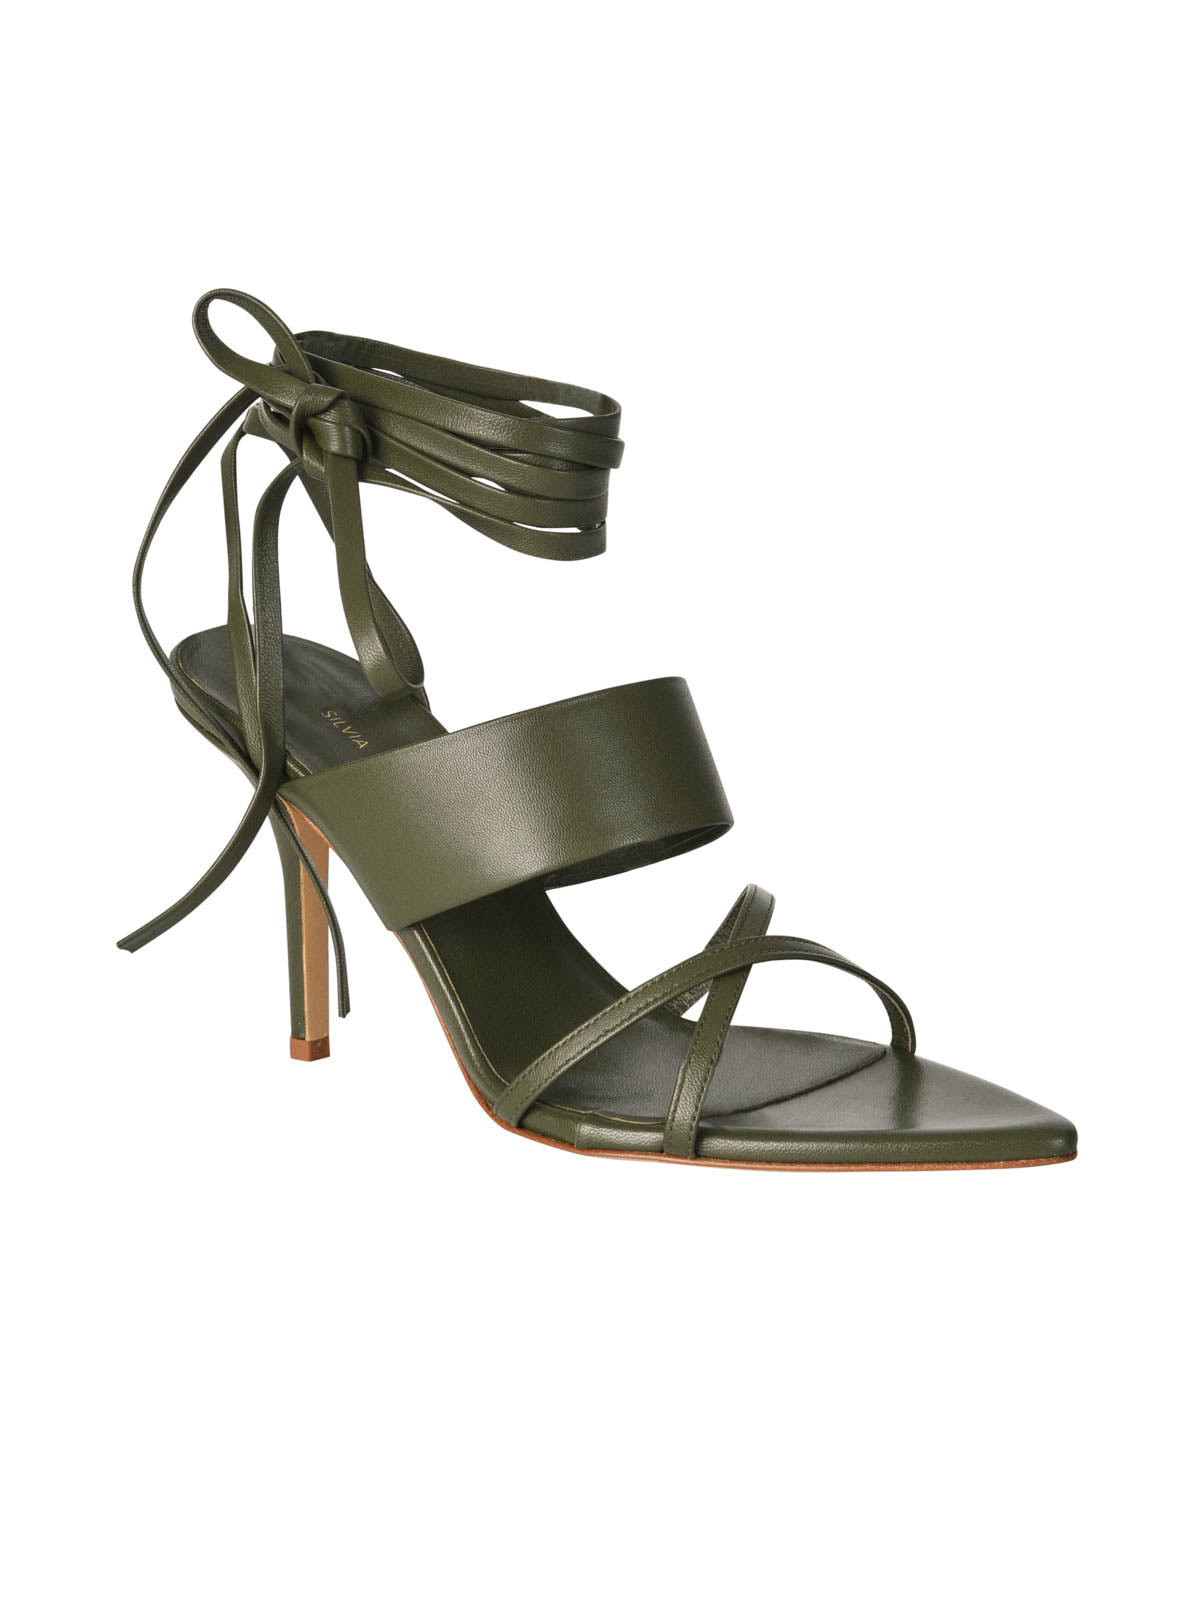 A pair of Olive Jimena Heels Olive from the Silvia Tcherassi collection, featuring ties around the ankle.